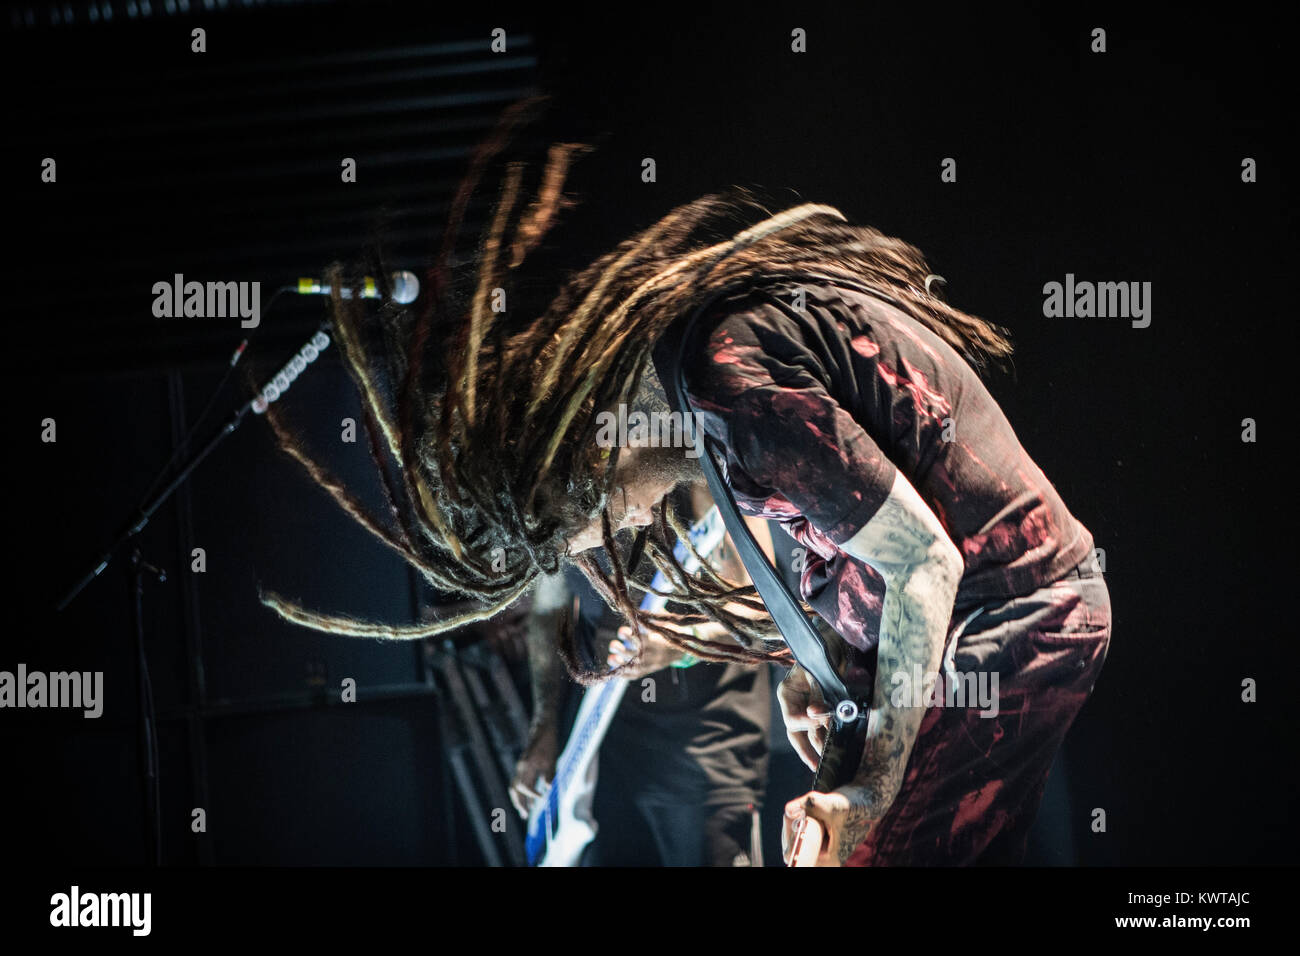 The American heavy metal band Korn (stylized KoЯn) performs a live concert at Amager Bio in Copenhagen.  In the picture: musician and guitarist Brian ”Head” Welch. Denmark 08/05 2014. Stock Photo